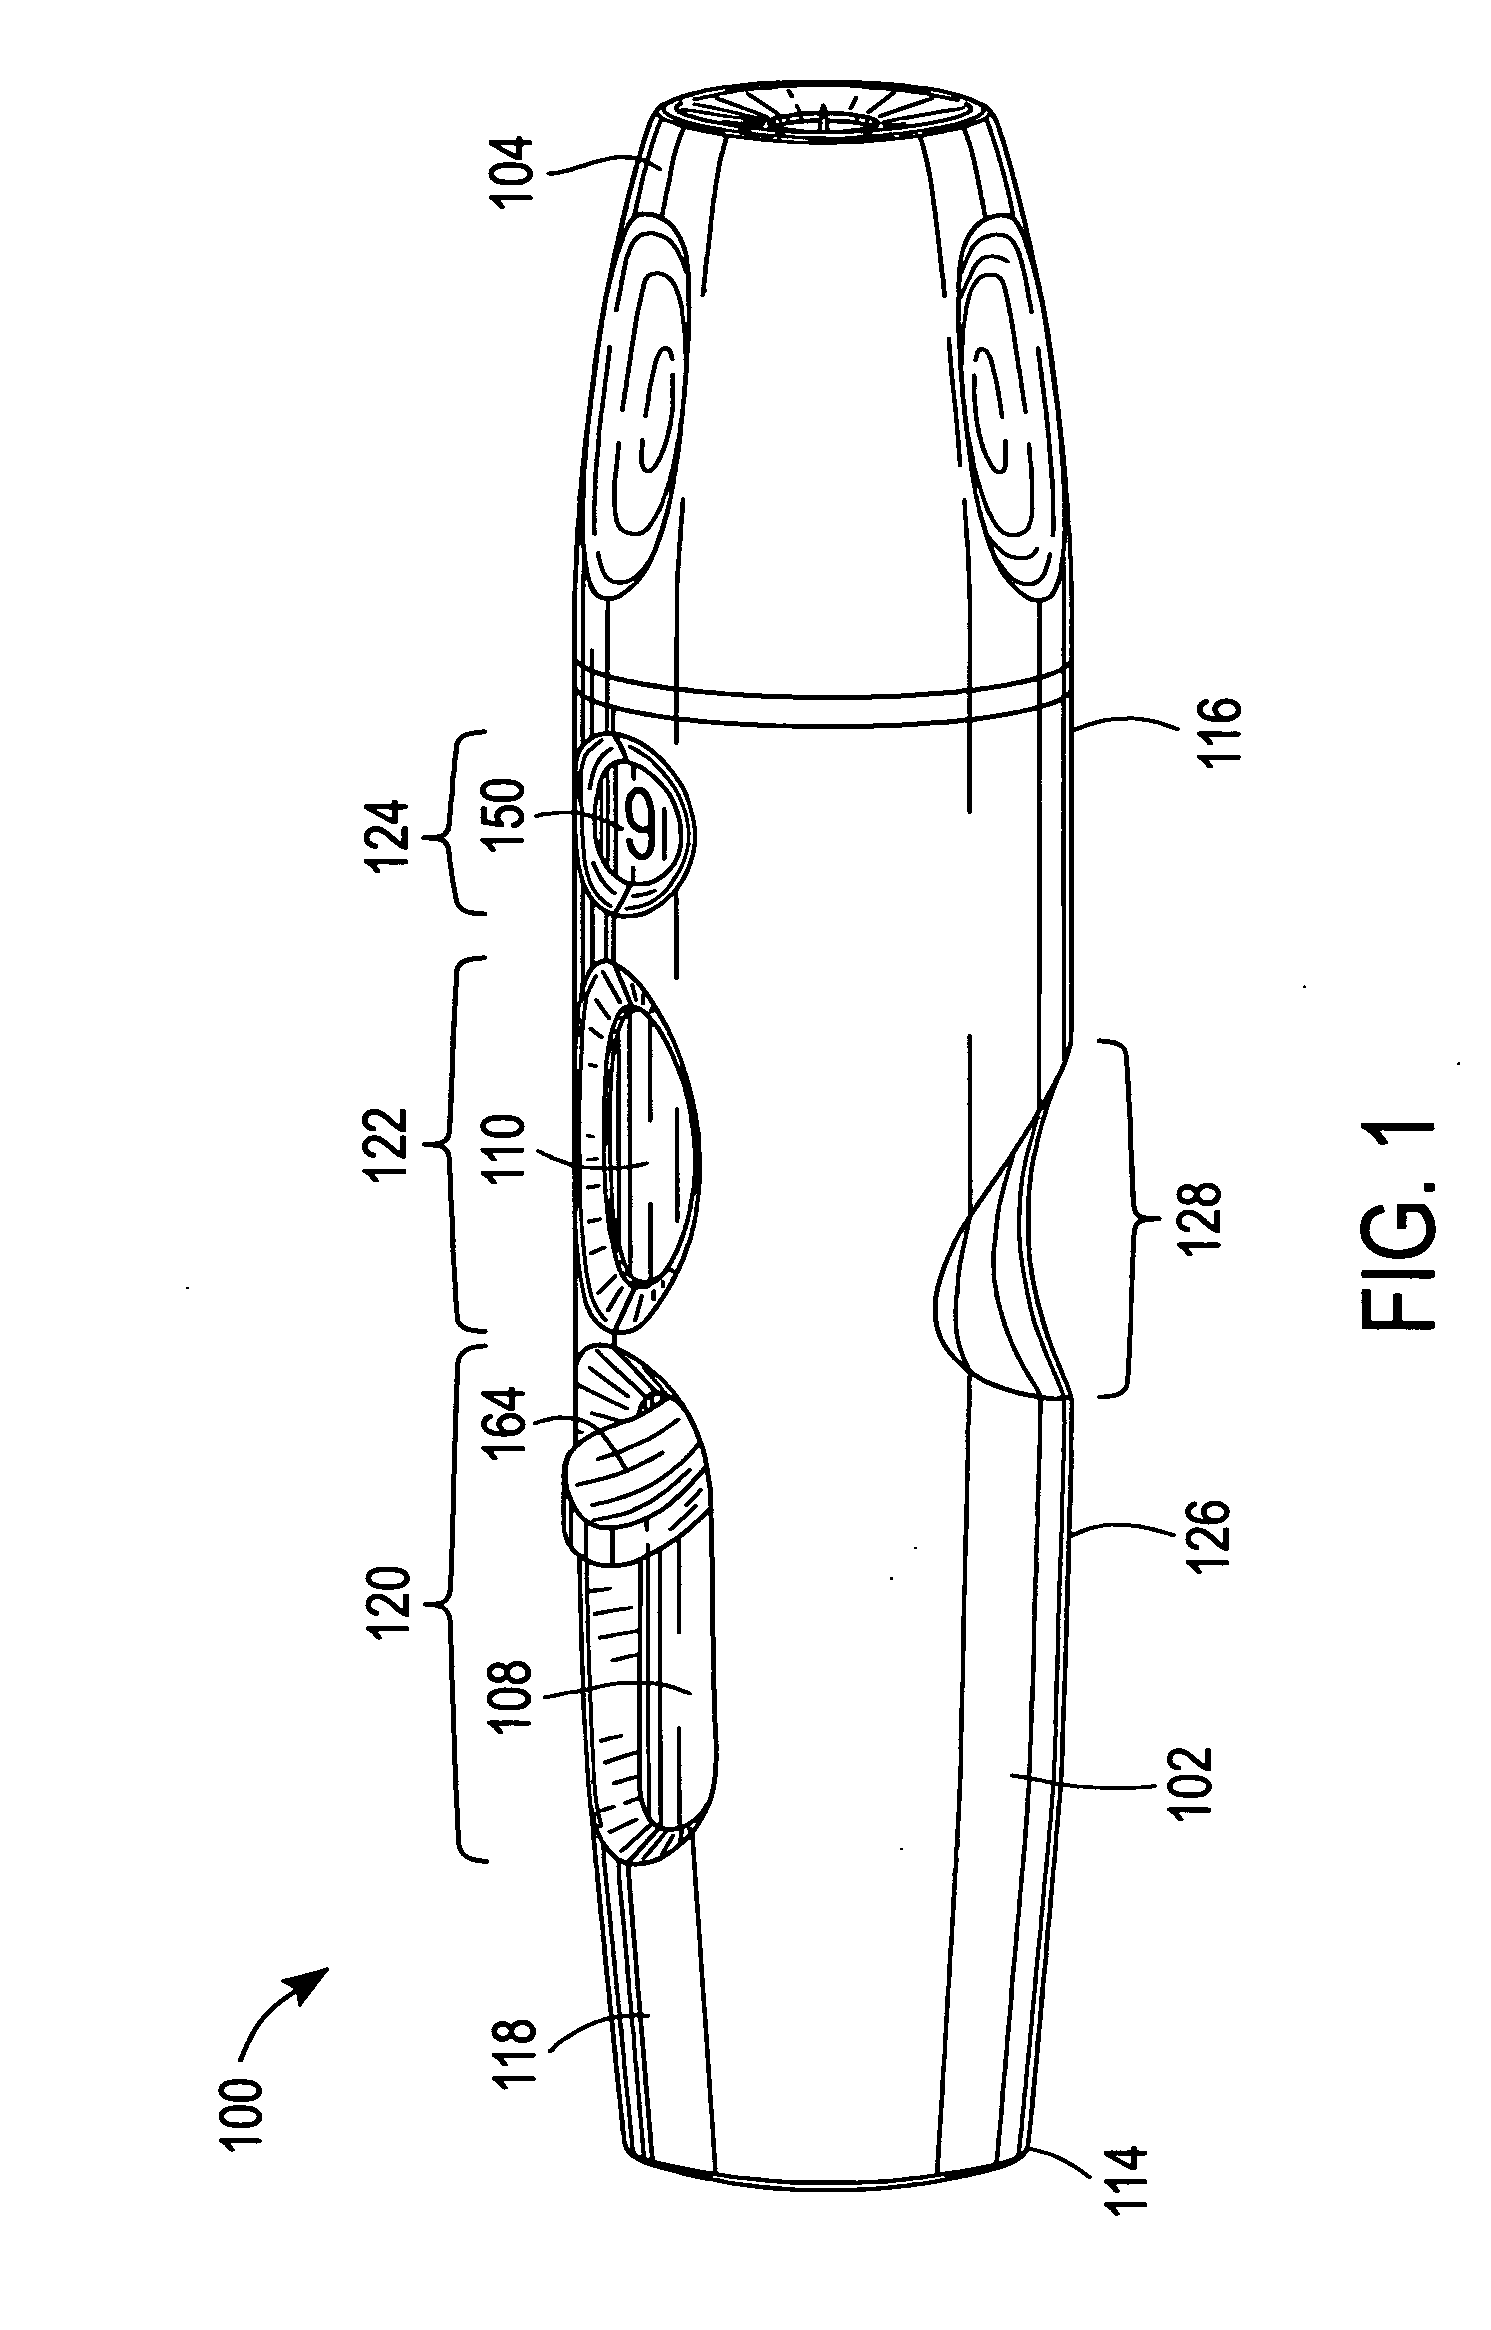 Combined lancing and auxiliary device